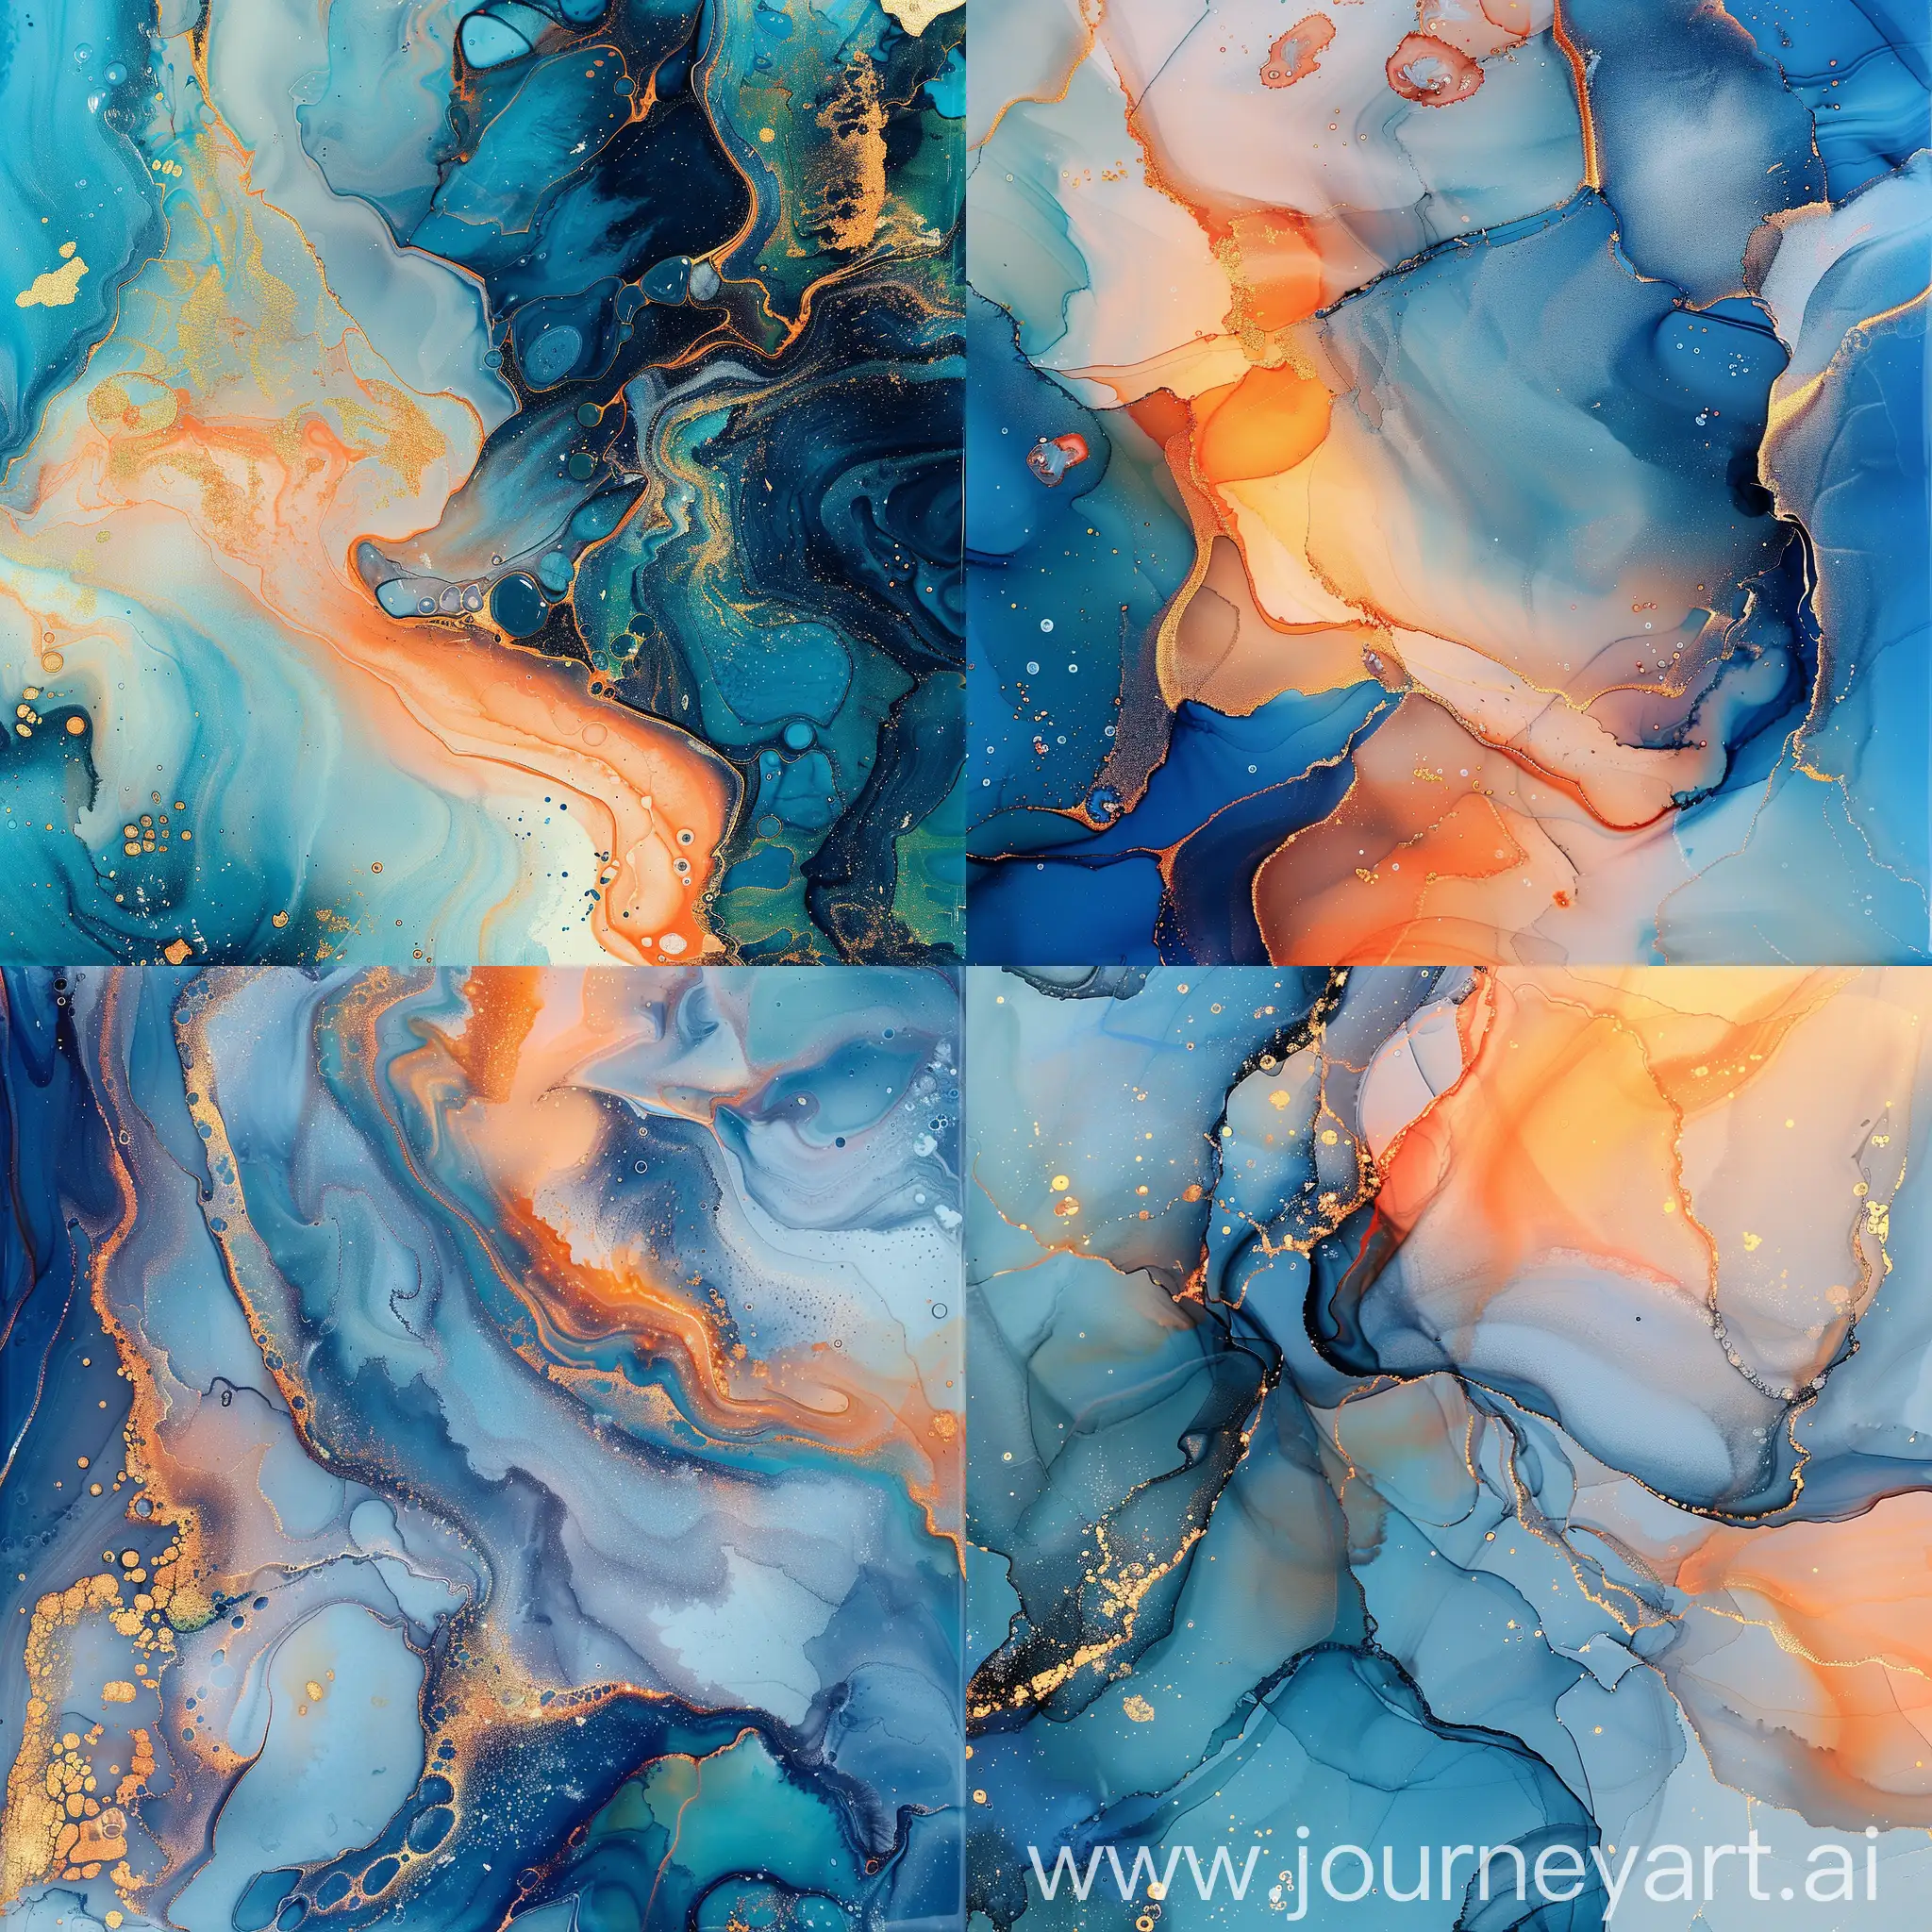 Marble ink abstract art background. Luxury abstract fluid art painting in alcohol ink technique, mixture of blue, orange and gold paints
